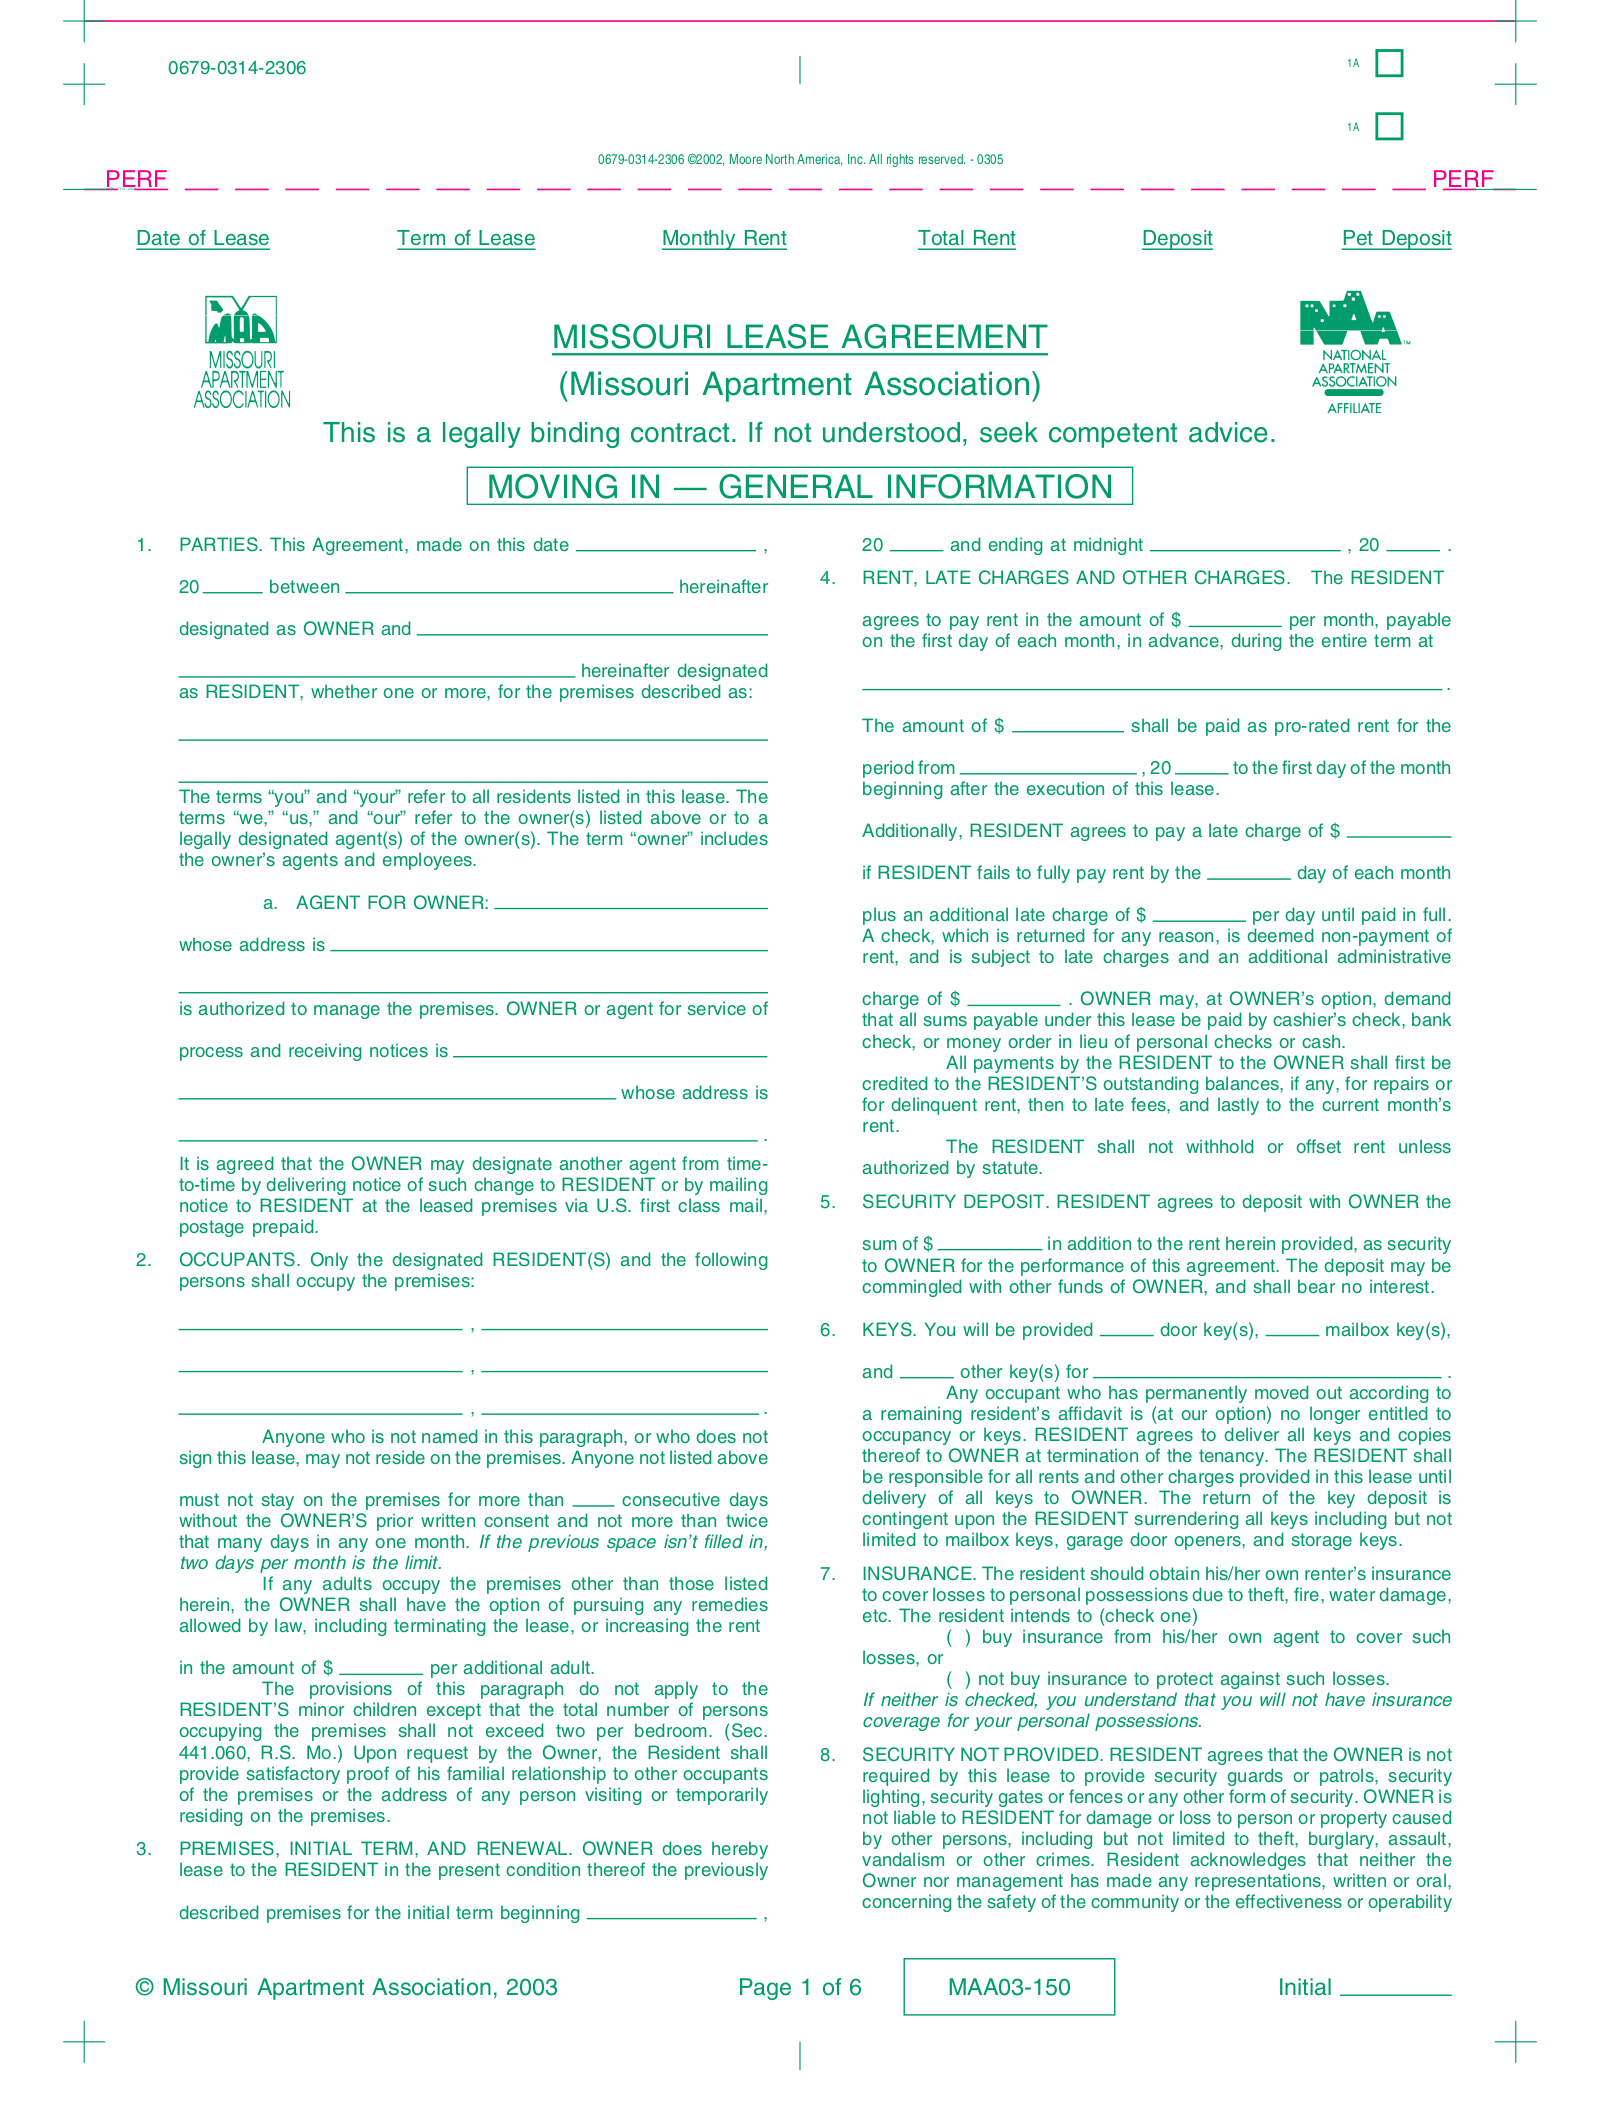 Missouri Apartment Association Residential Lease Agreement Form